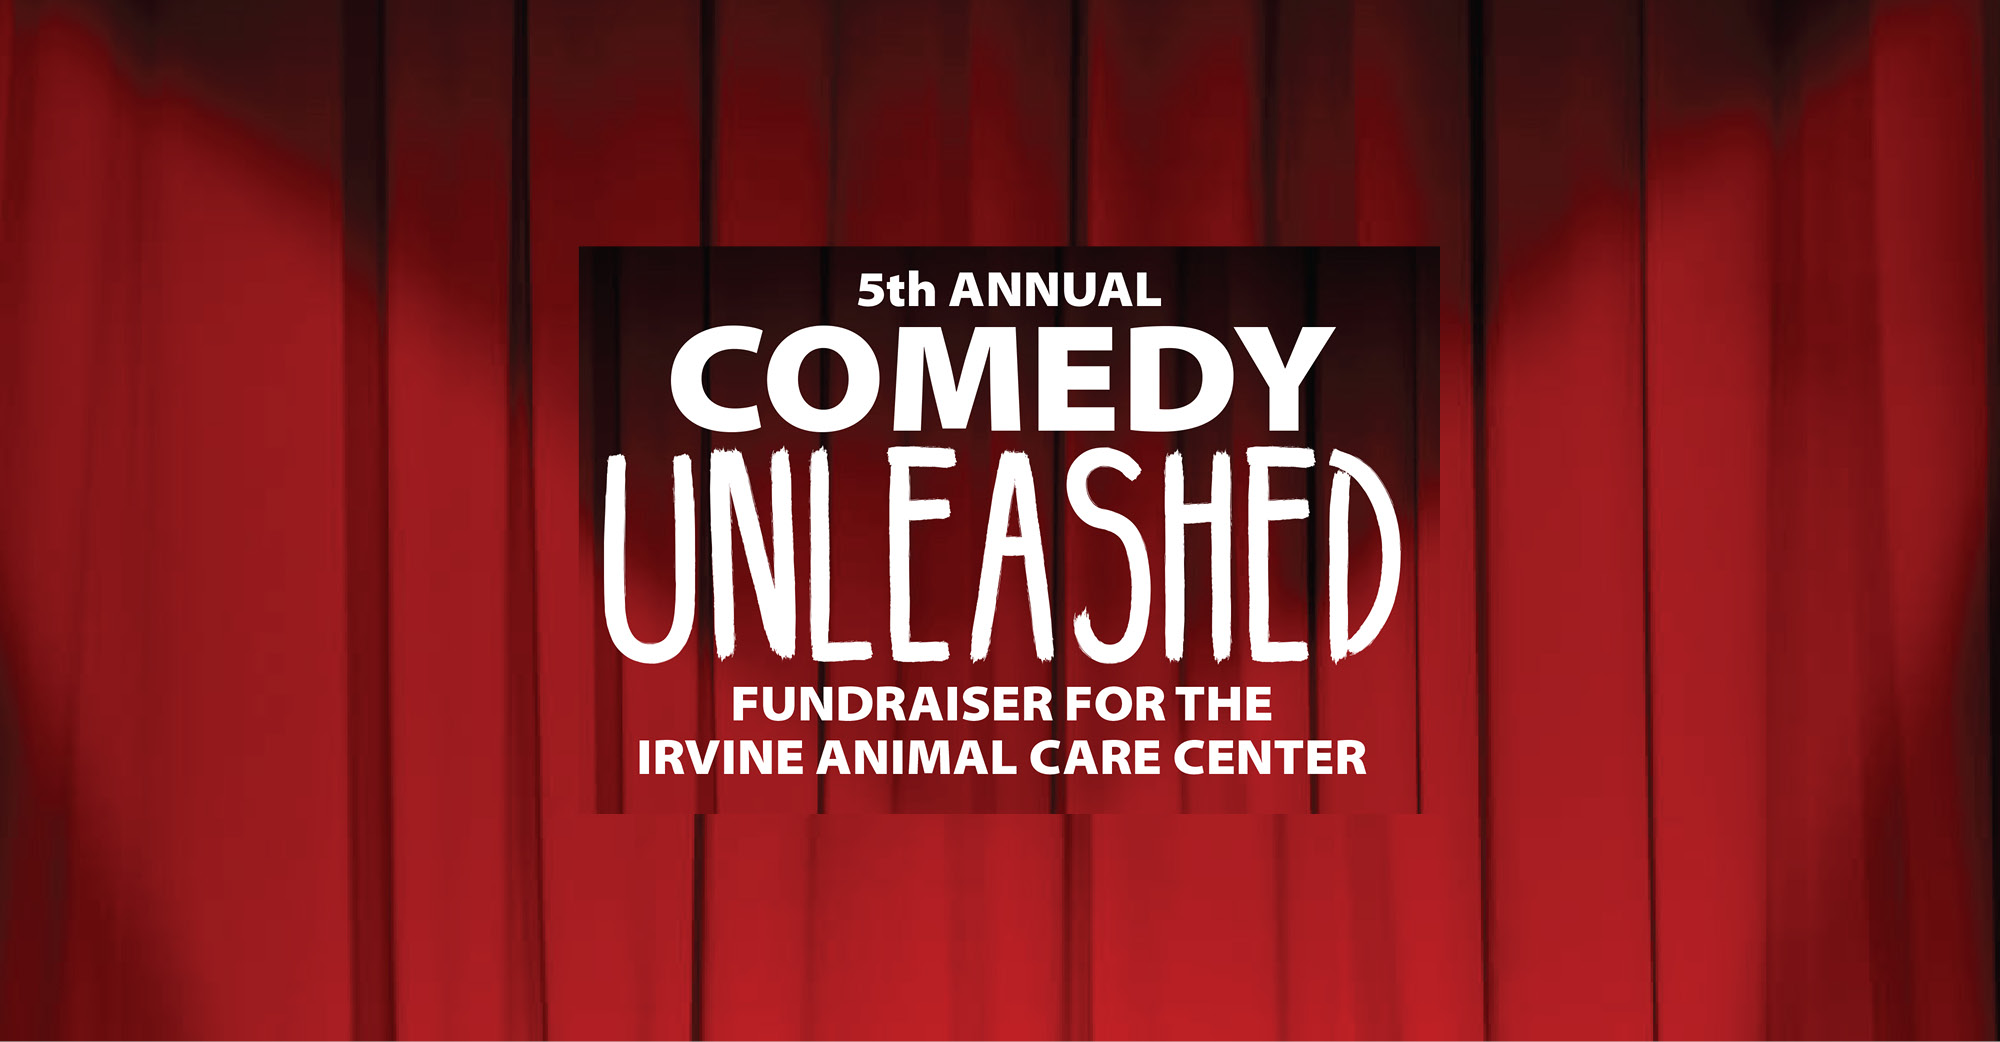 Support Adoptable Animals With Comedy Event At Irvine Improv City Of Irvine